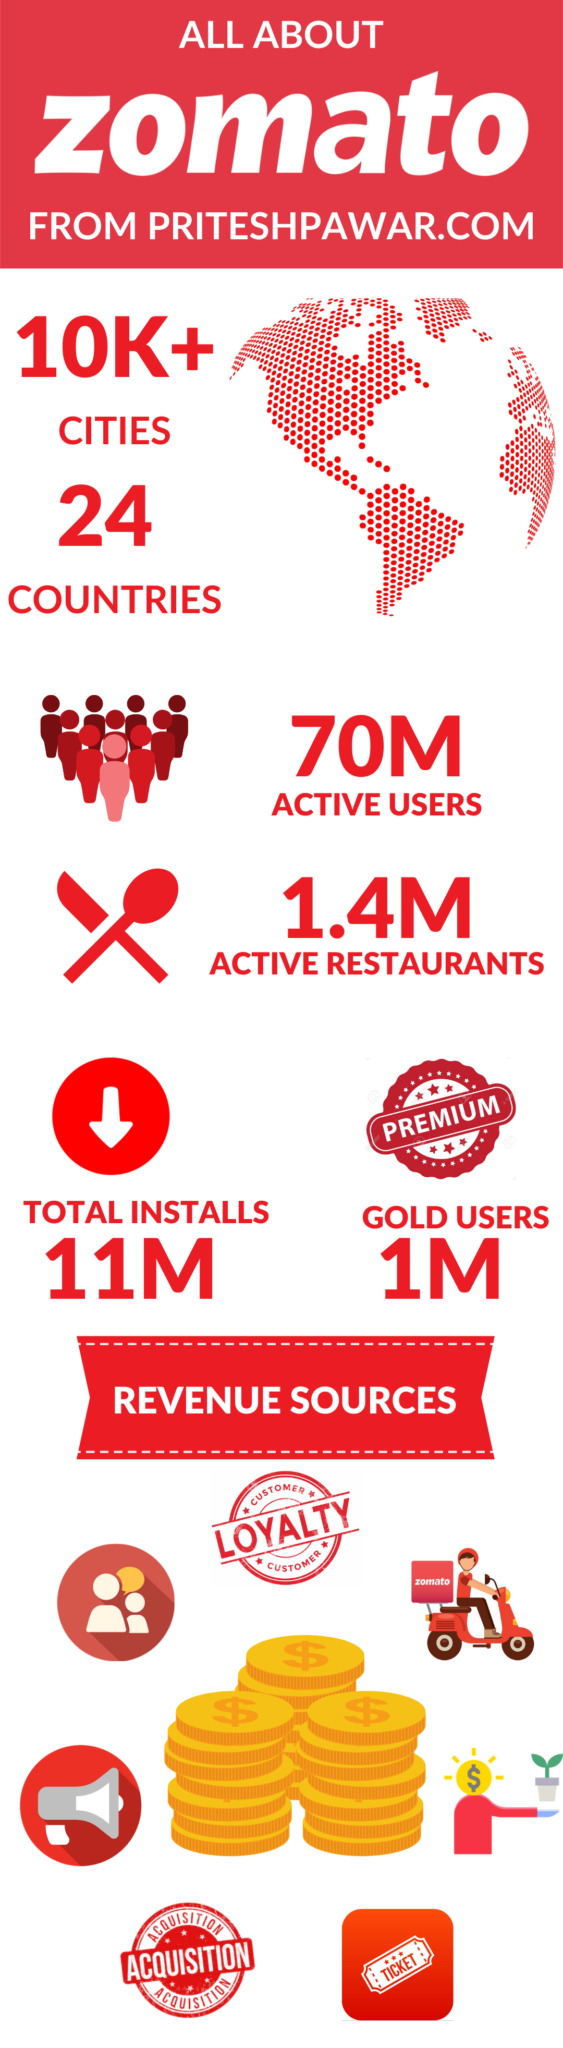 Infographic For Zomato Business Model